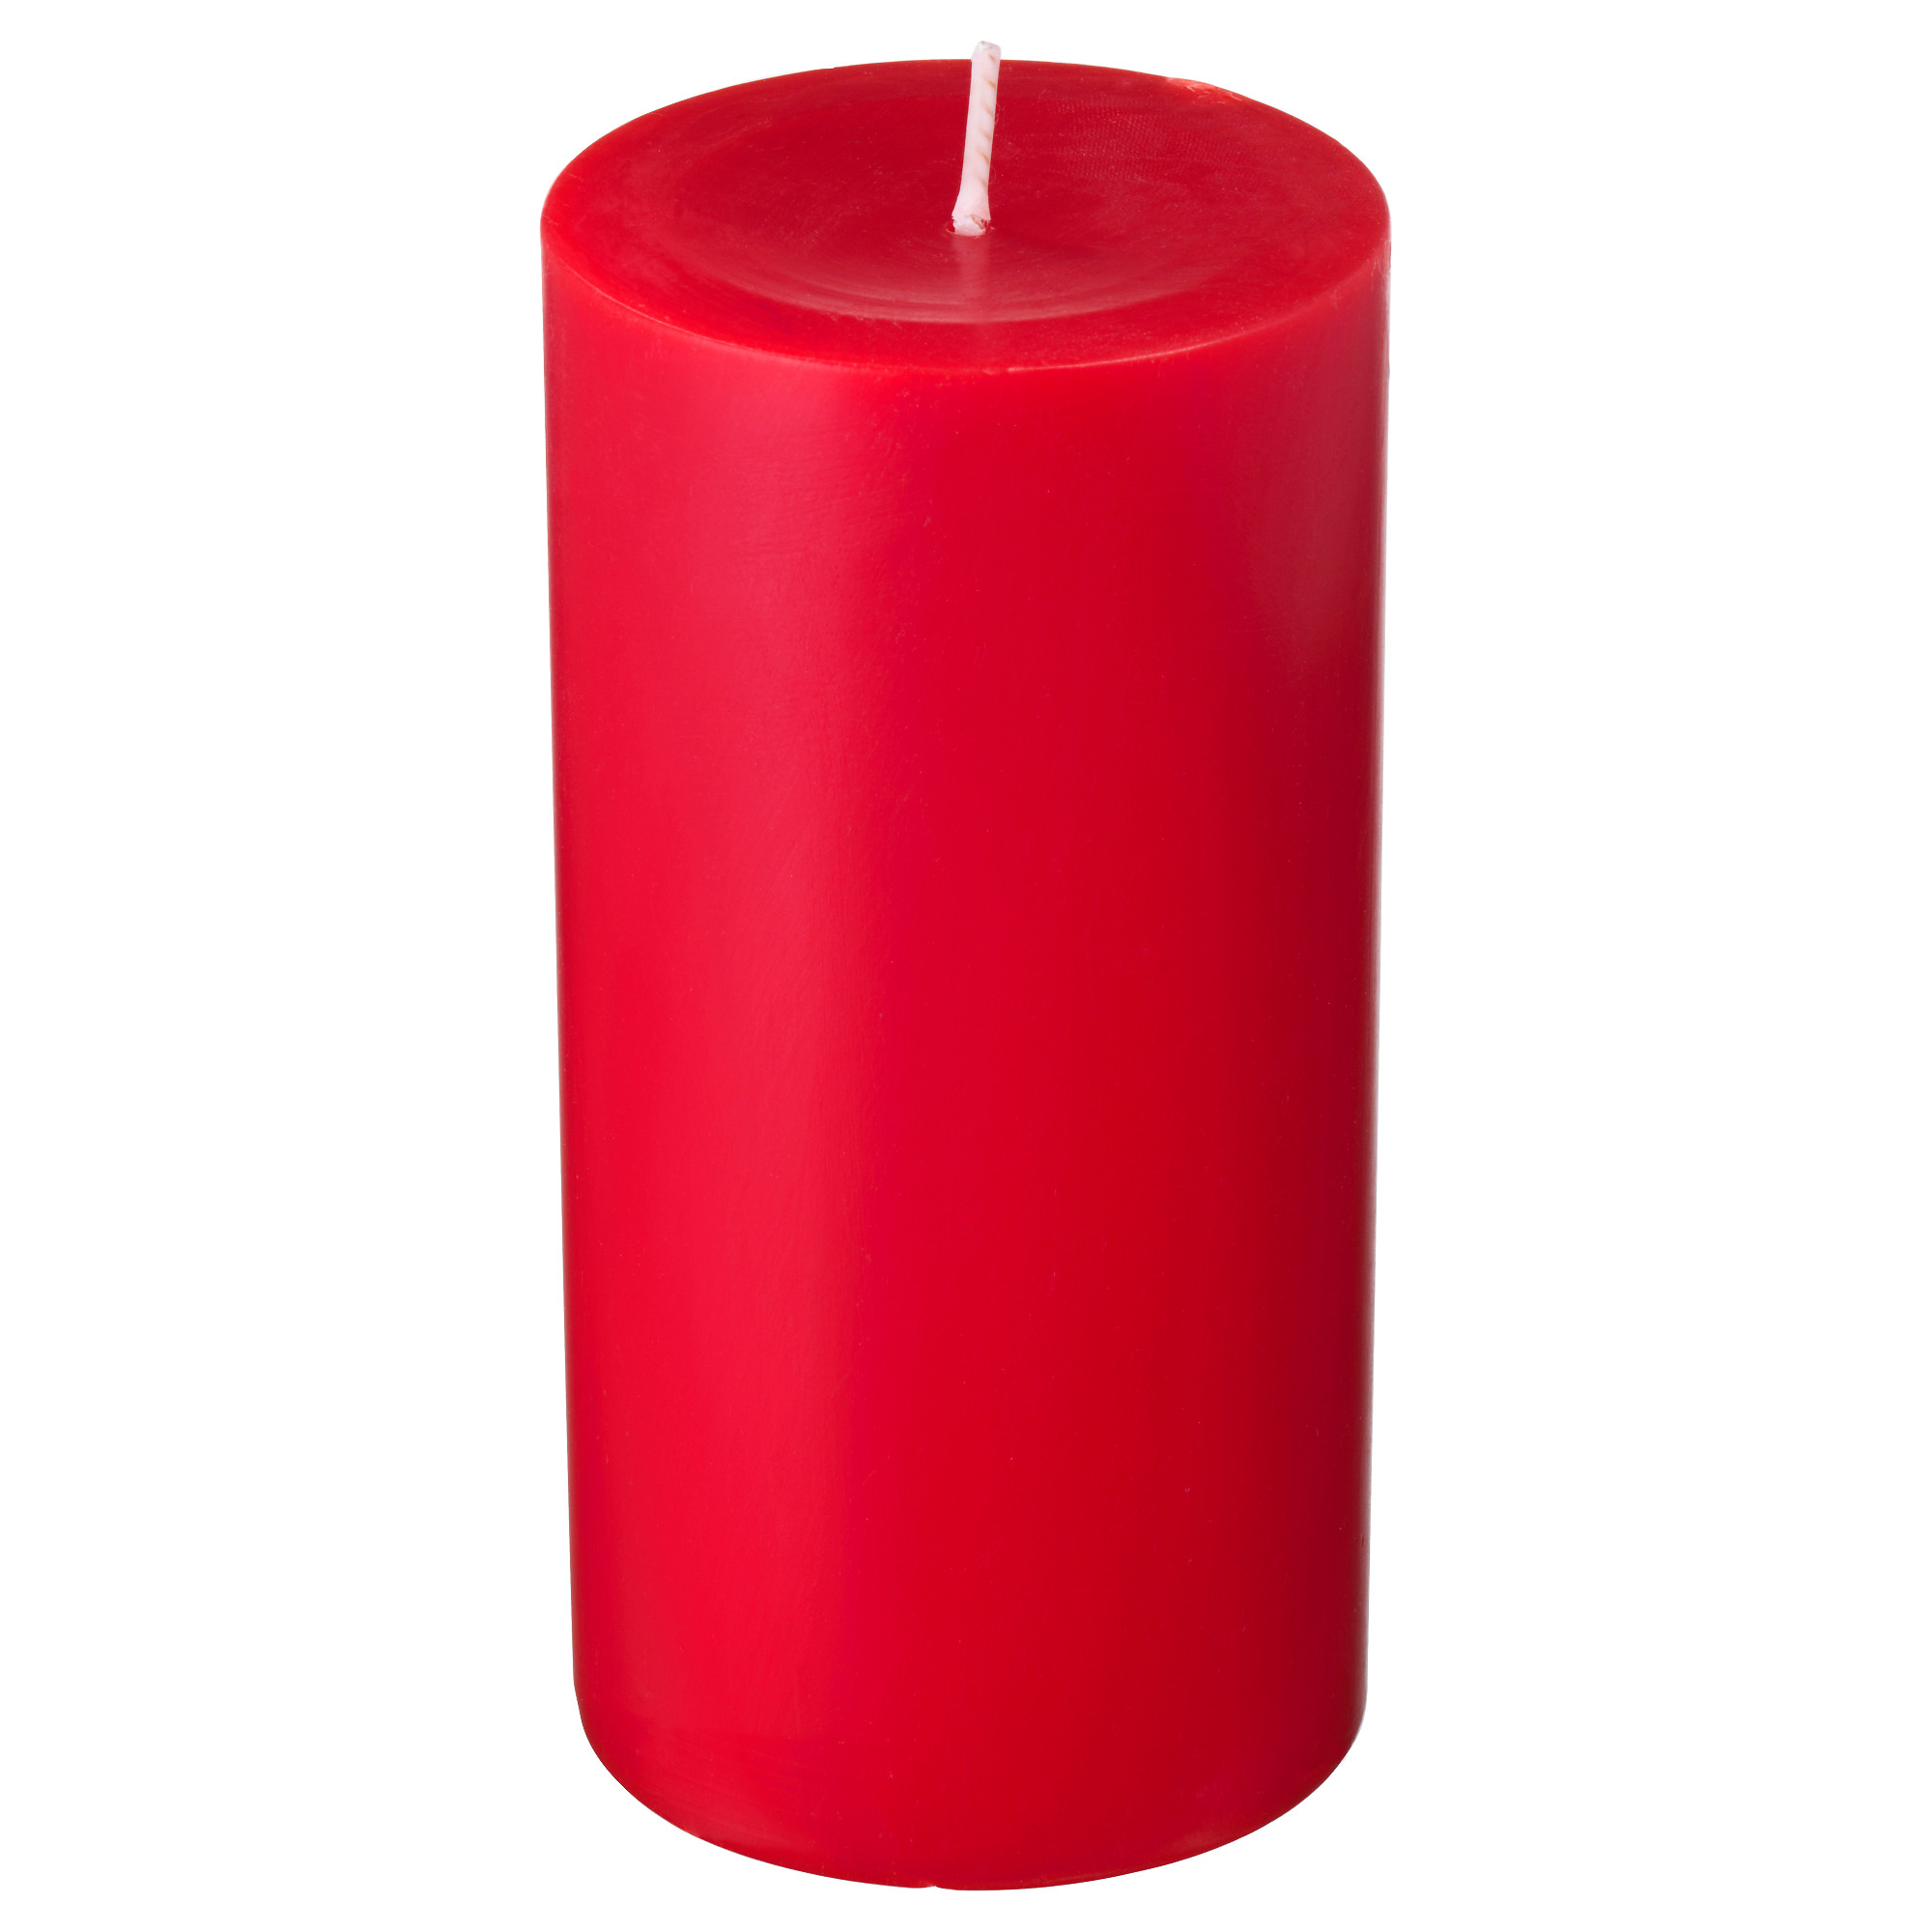 SINNLIG scented block candle, κόκκινο, Scented candles | IKEA Κύπρος